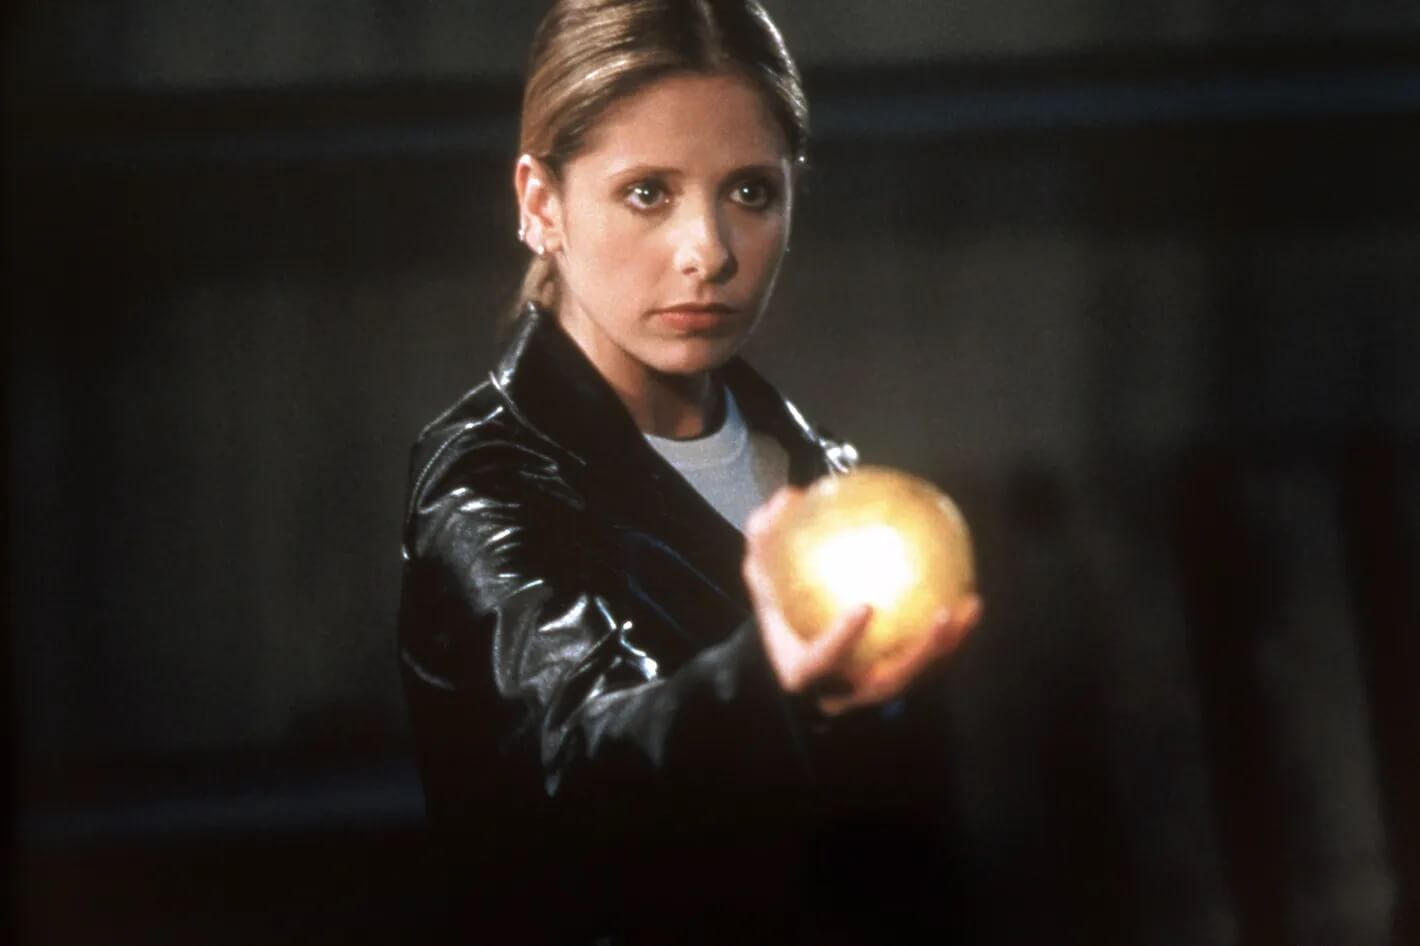 Sarah Michelle Gellar, best known as Buffy Summers, will star in Wolf Pack